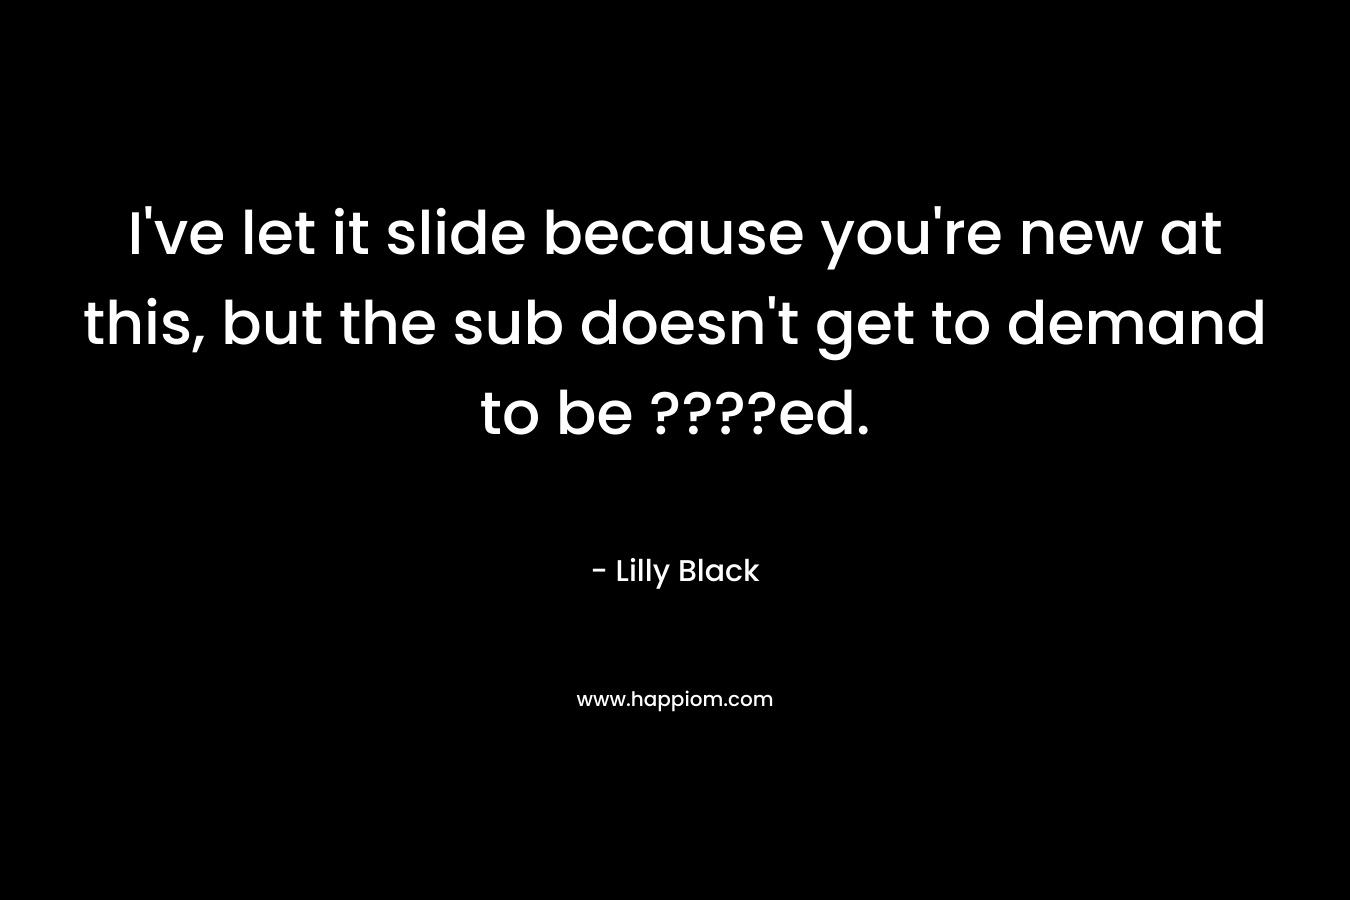 I’ve let it slide because you’re new at this, but the sub doesn’t get to demand to be ????ed. – Lilly Black